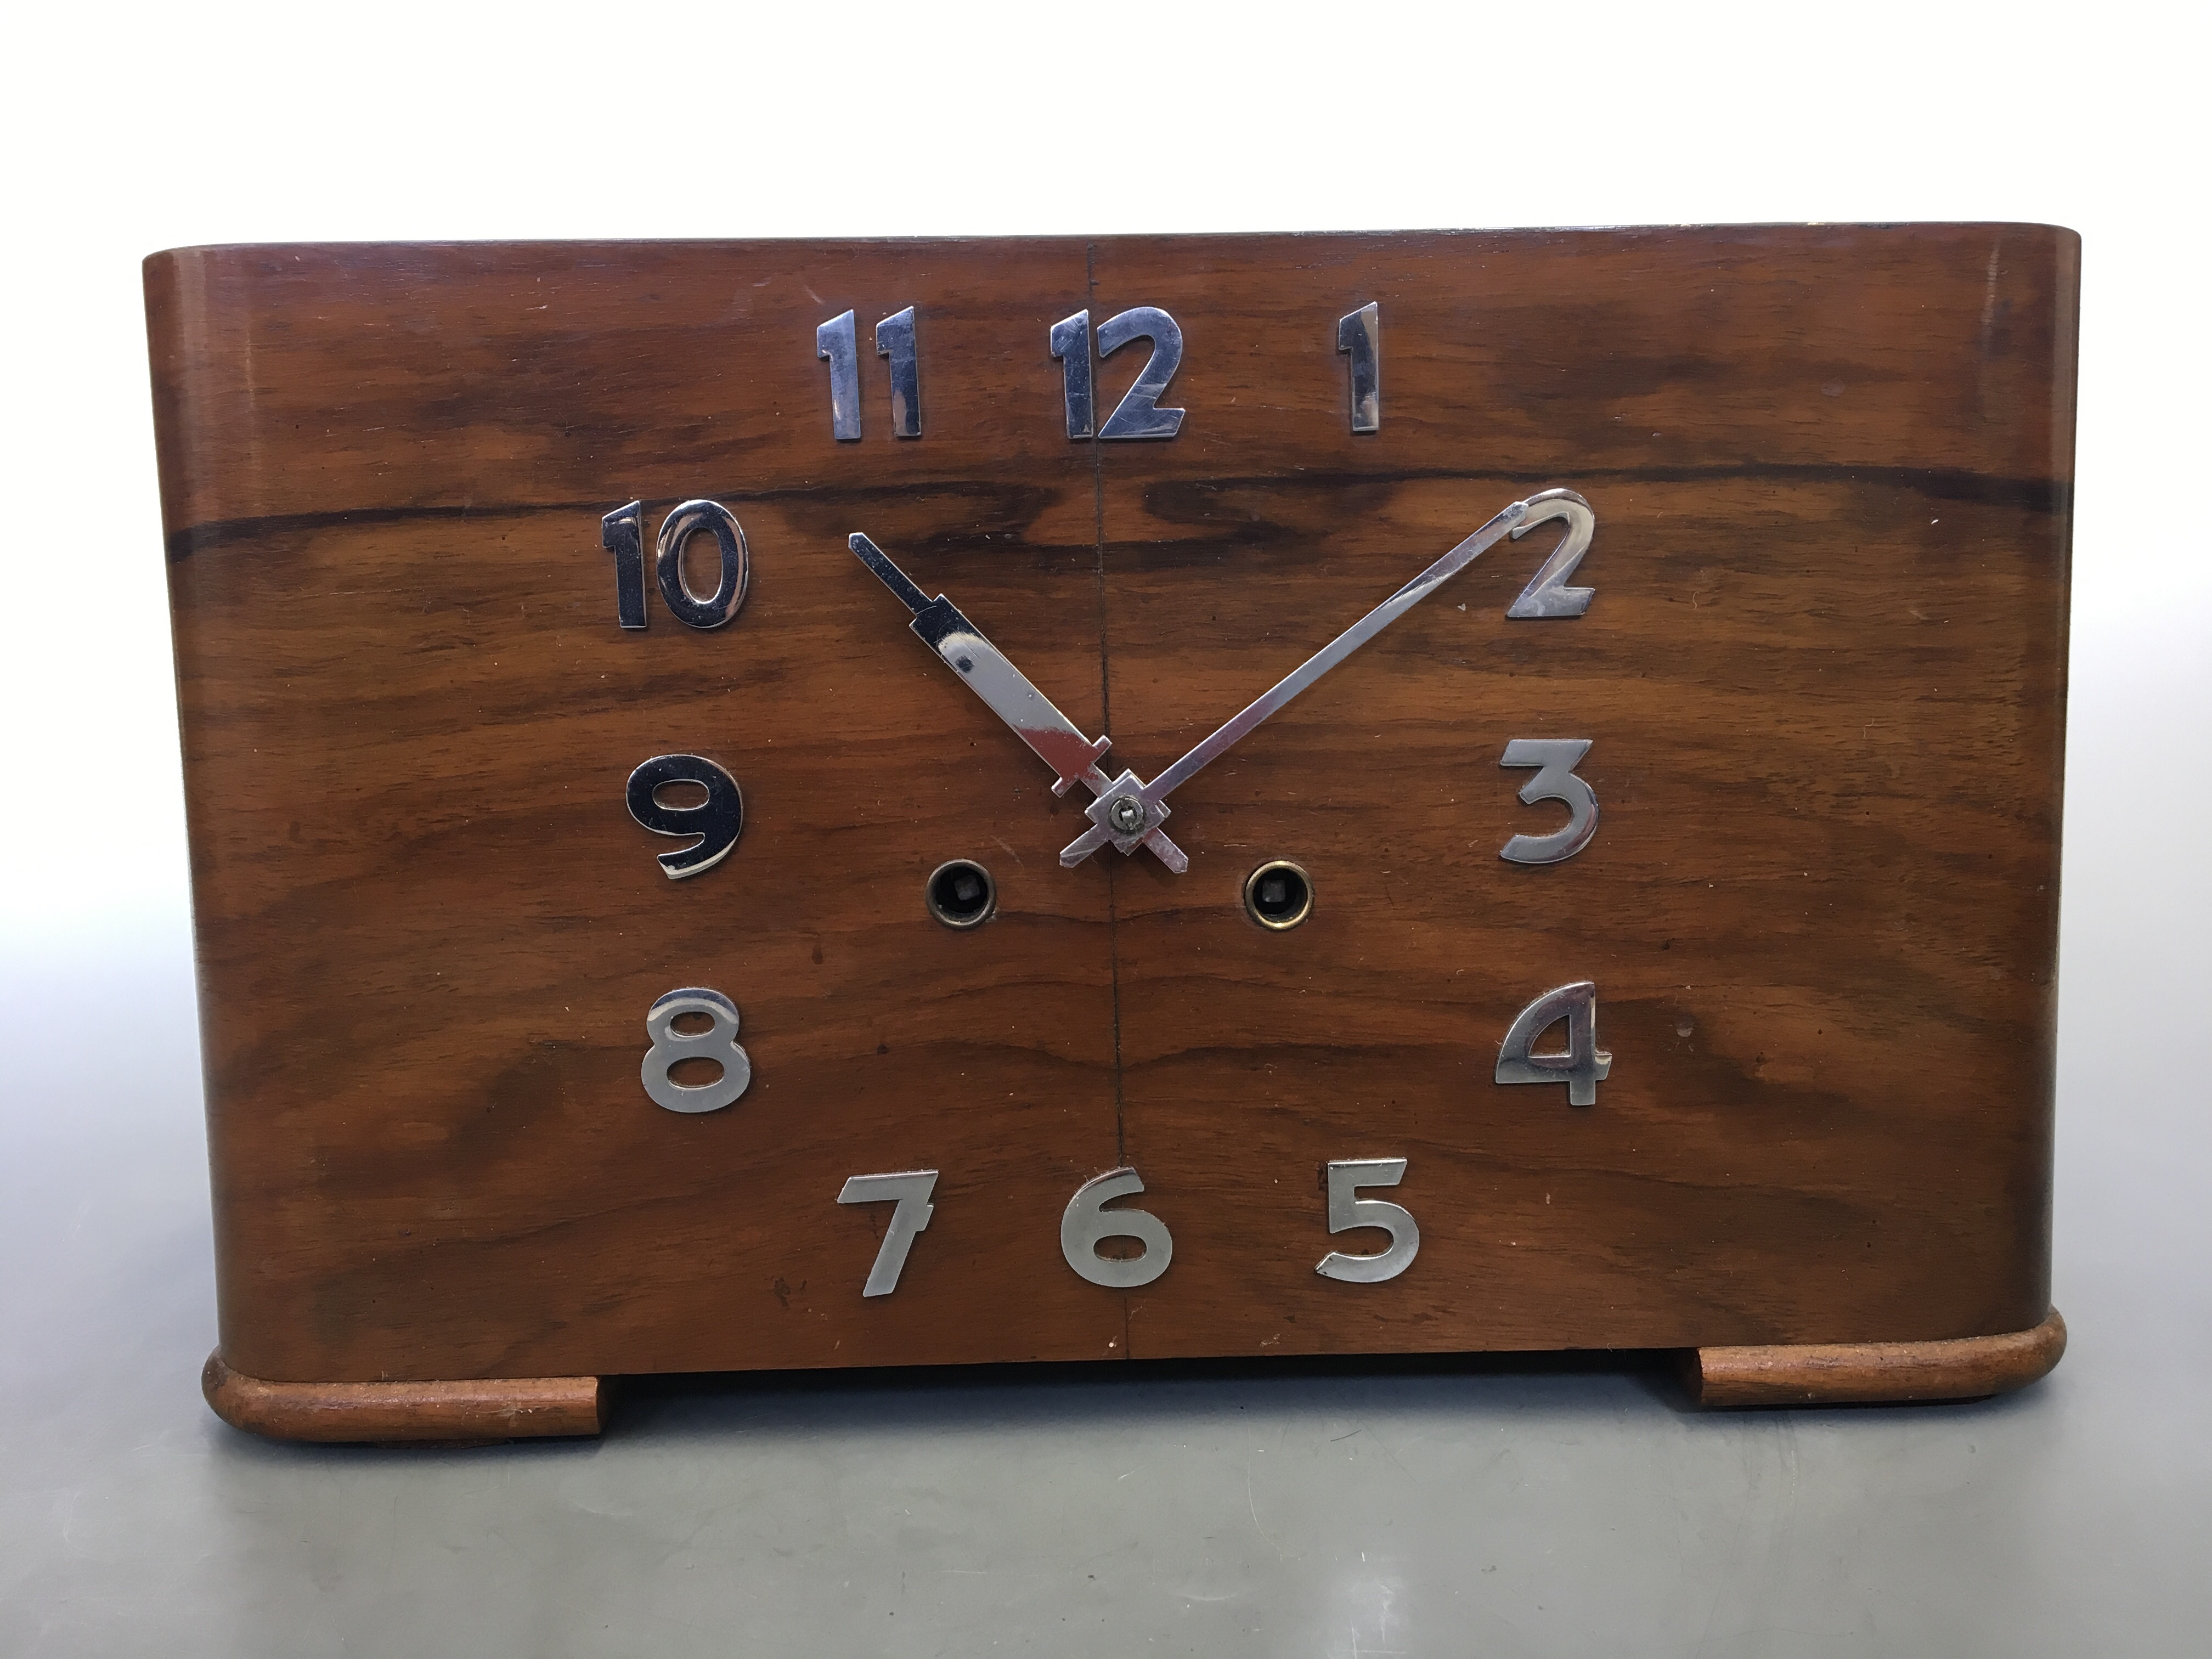 An Art Deco walnut striking mantel clock with chrome hands and numbers, 21.5cm x 35.5cm x 12.5cm.